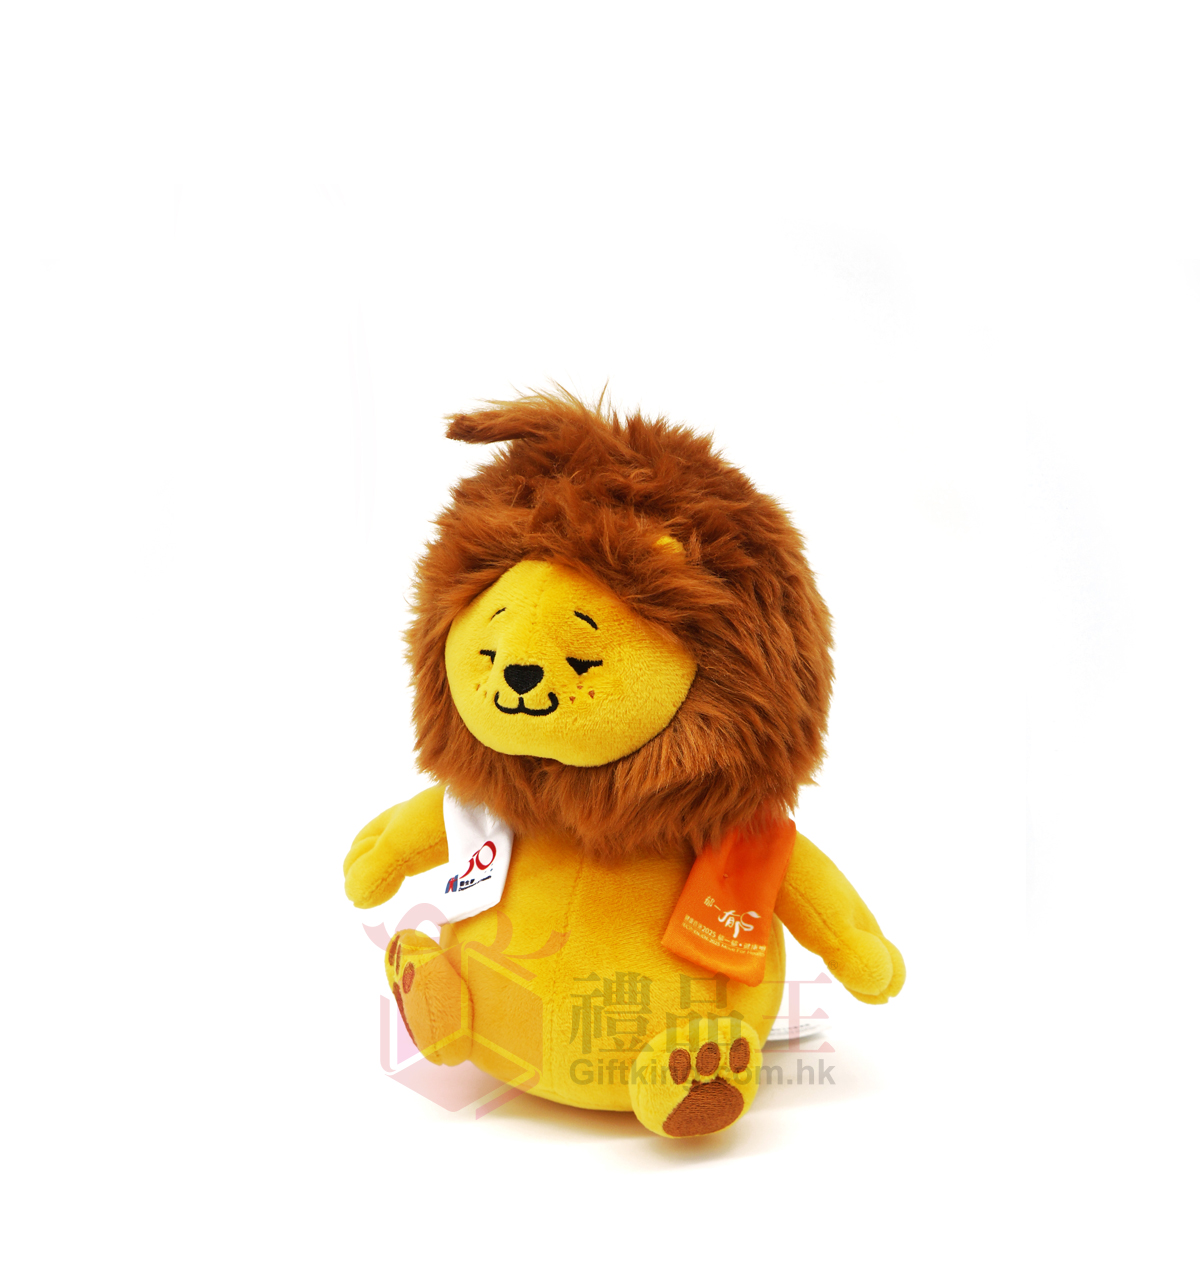 Department of Health Lion Doll (Advertising Gift)